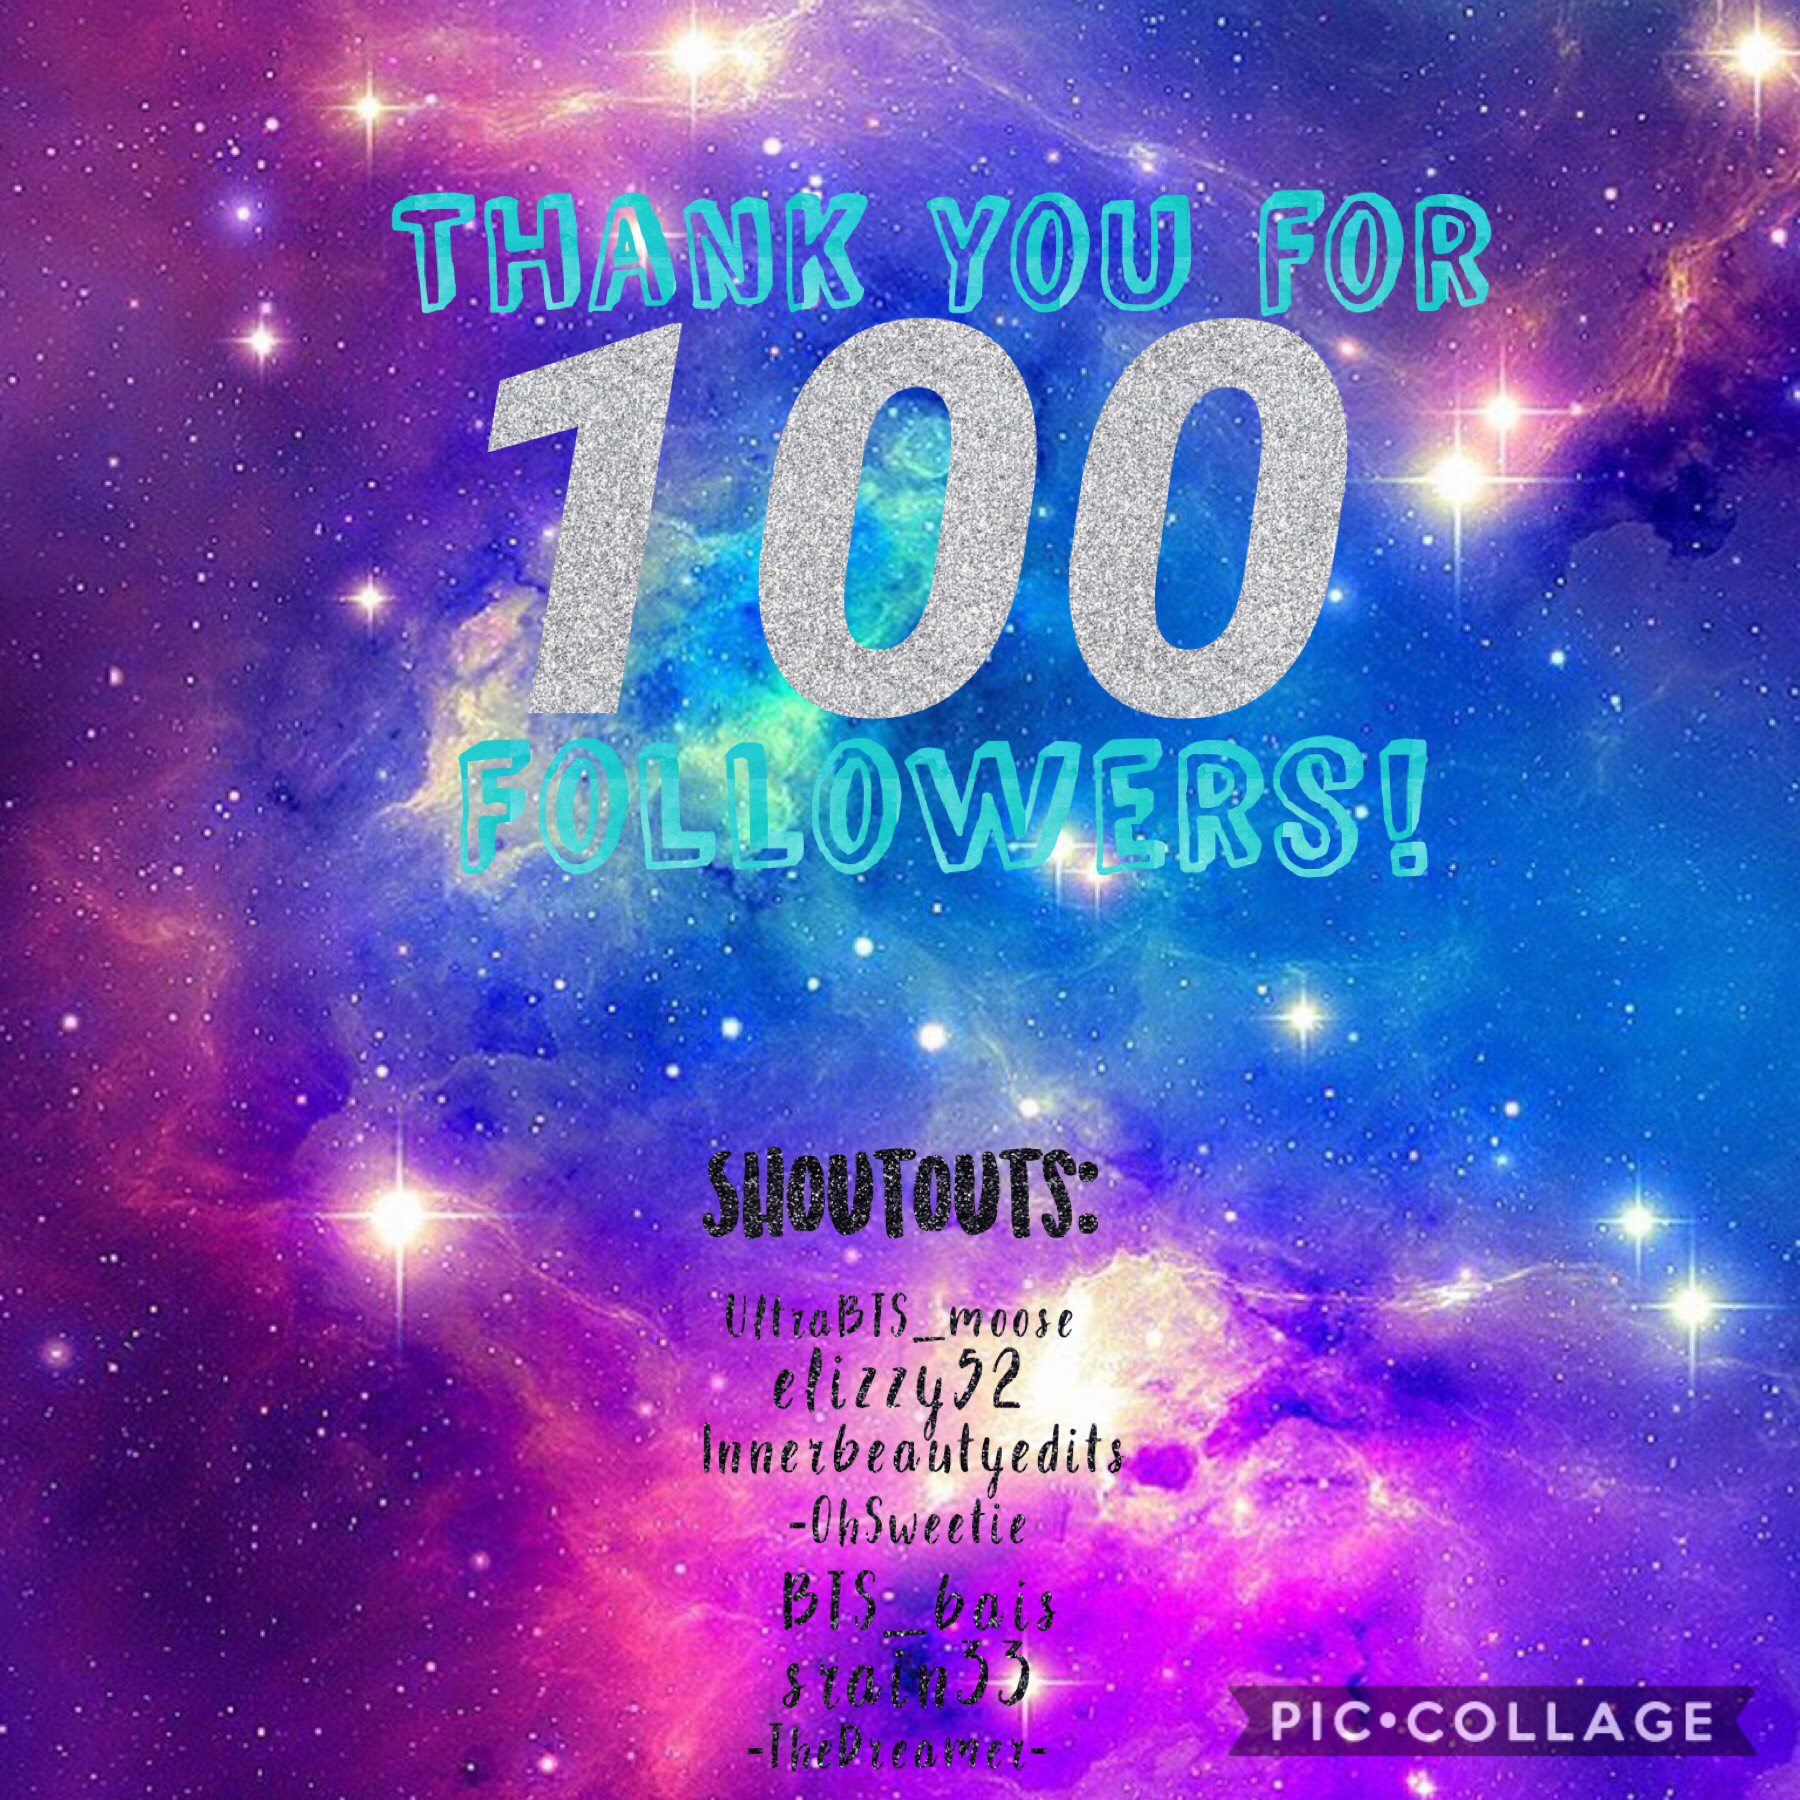 Thank you so much!!! I will give more shoutouts in the future!